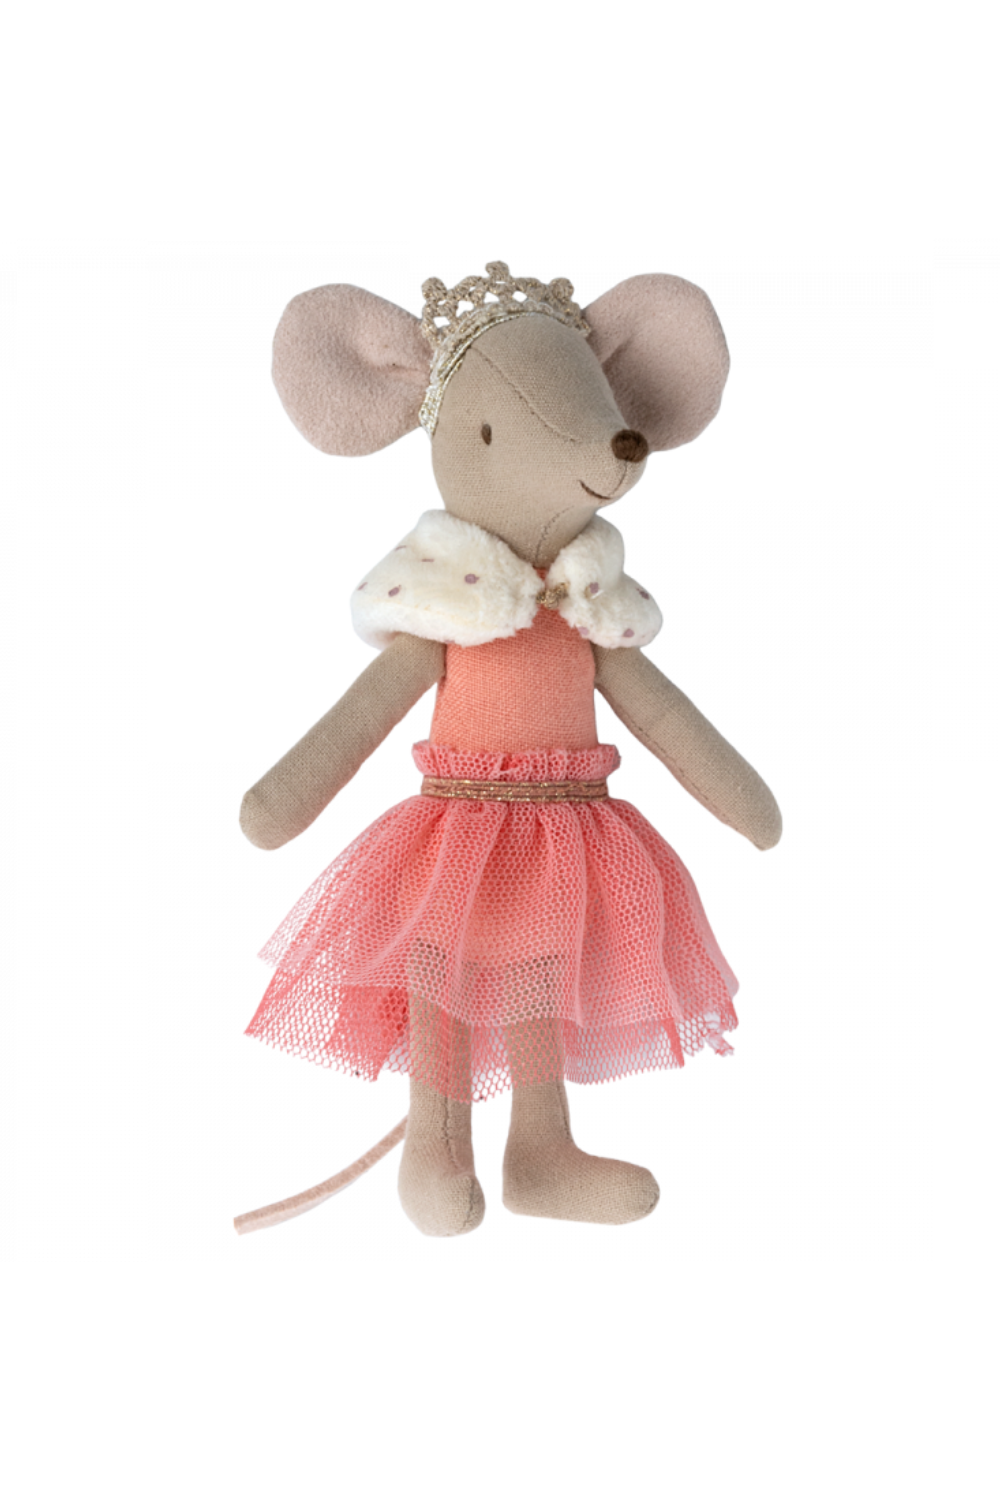 Princess Mouse, Big Sister in Coral: Royal Dollhouse Charm